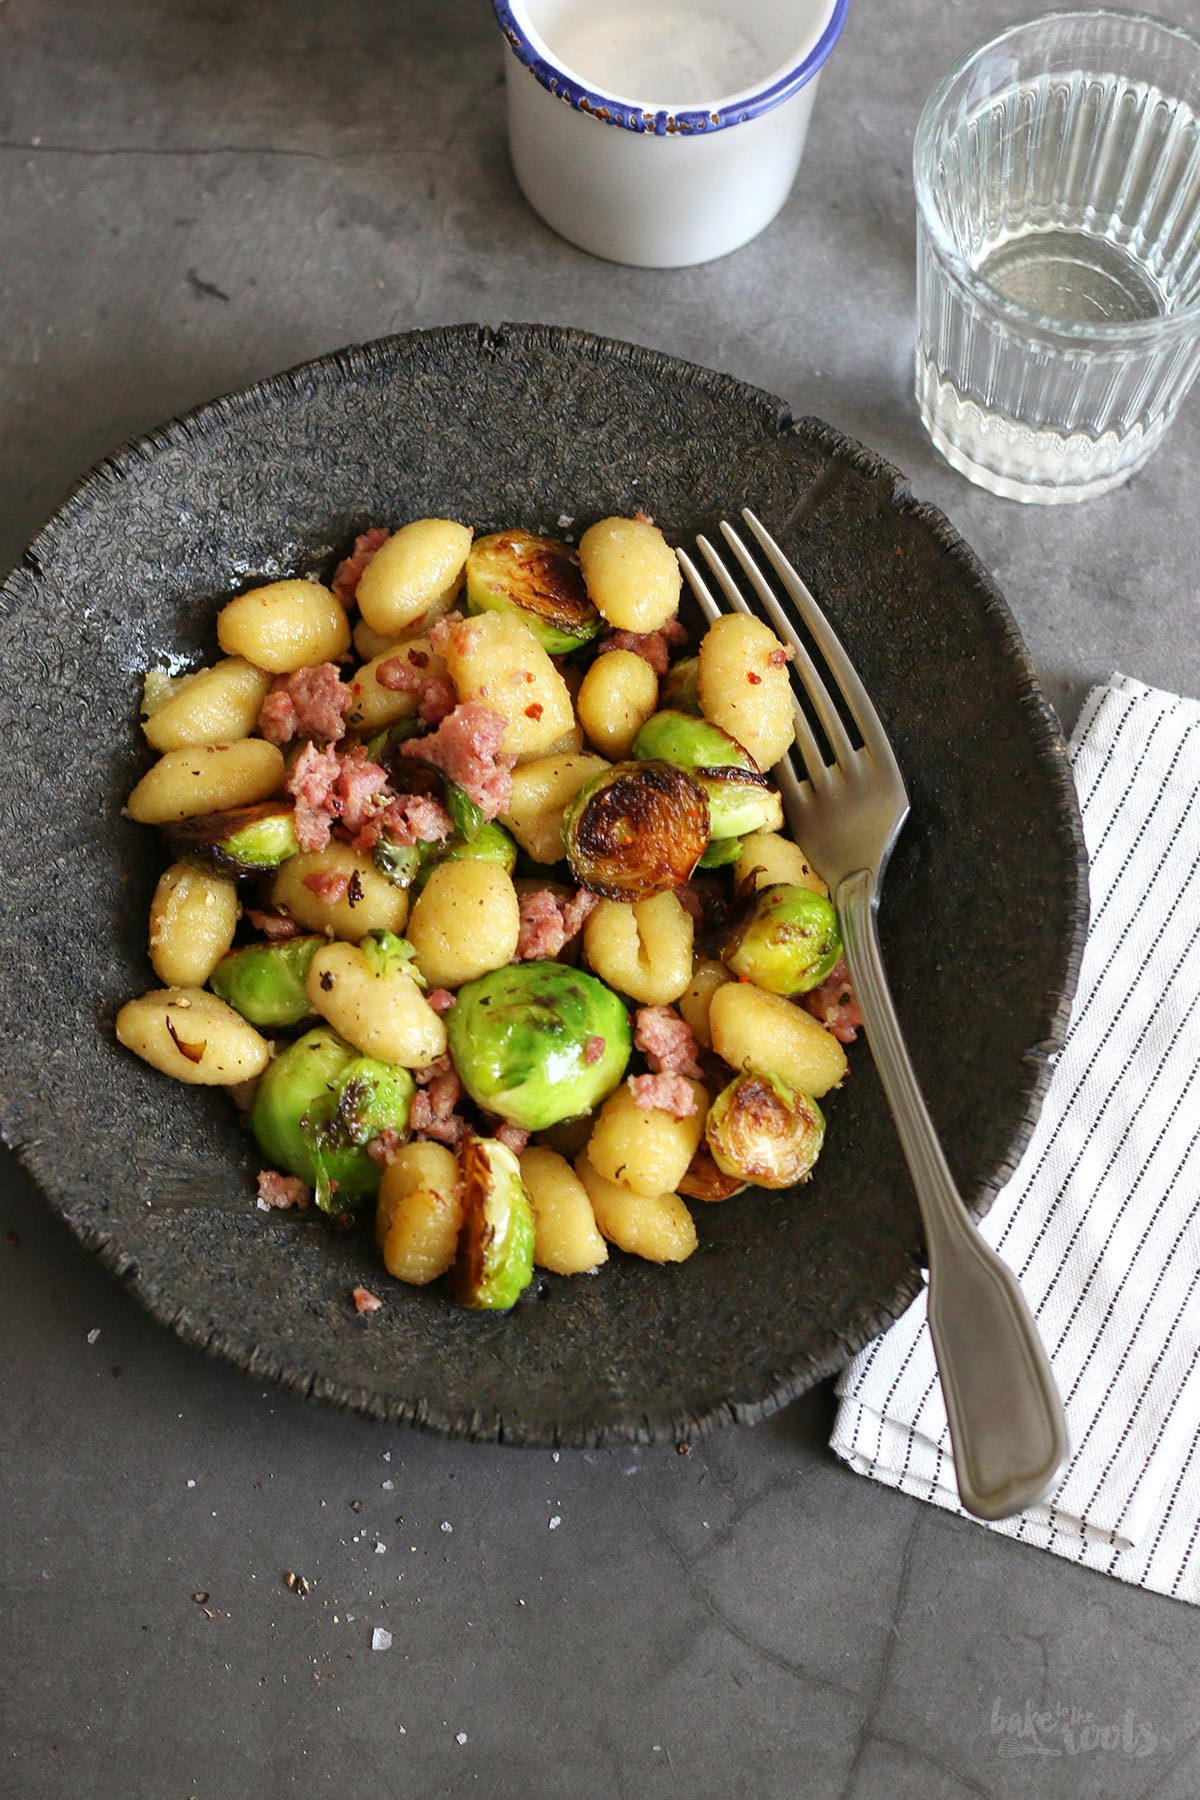 Gnocchi with Brussels Sprouts and Salsiccia | Bake to the roots